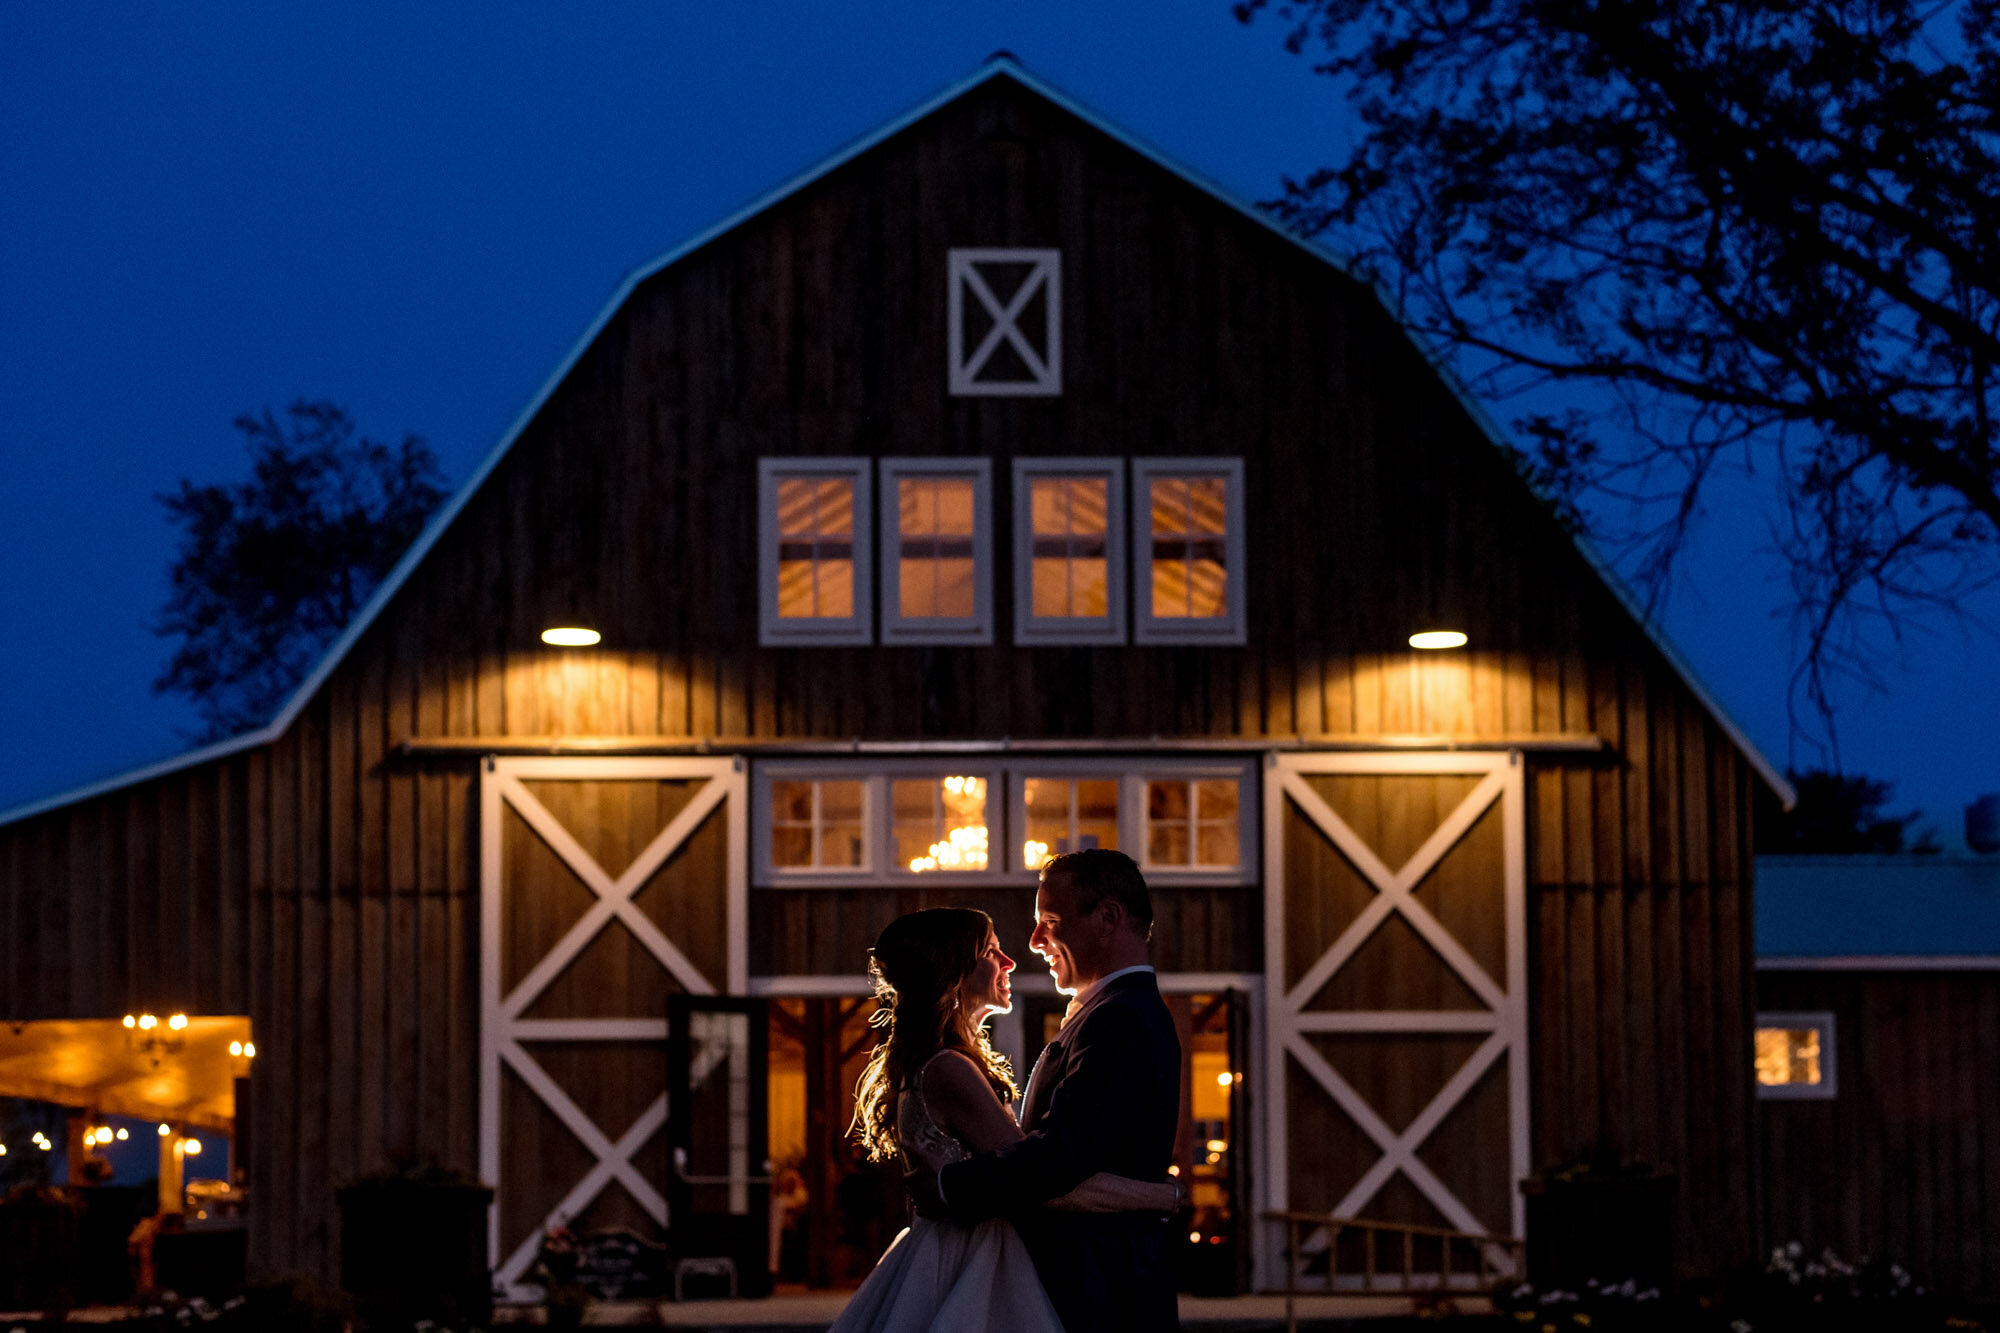 Portrait of a bride and groom taken at dusk in front of a barn at Stonefields